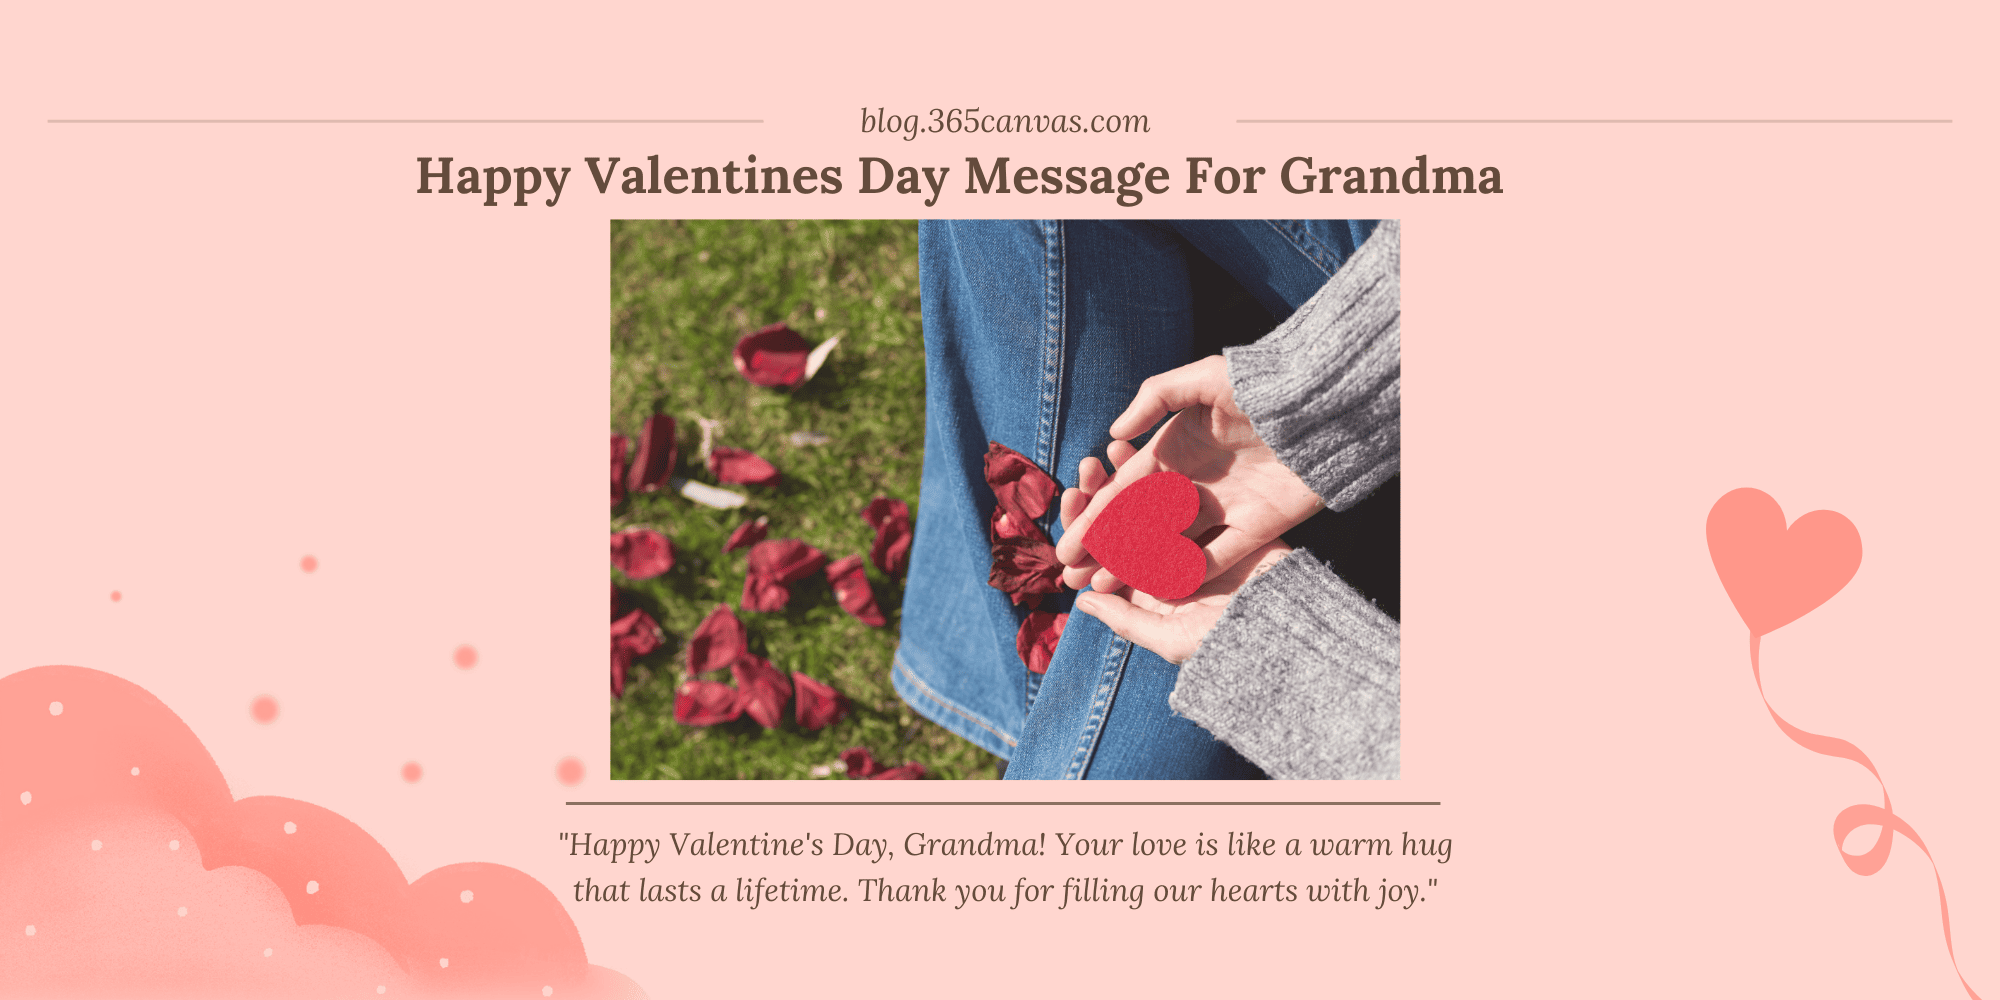 70+ Wonderful Valentine’s Day Messages for Grandma